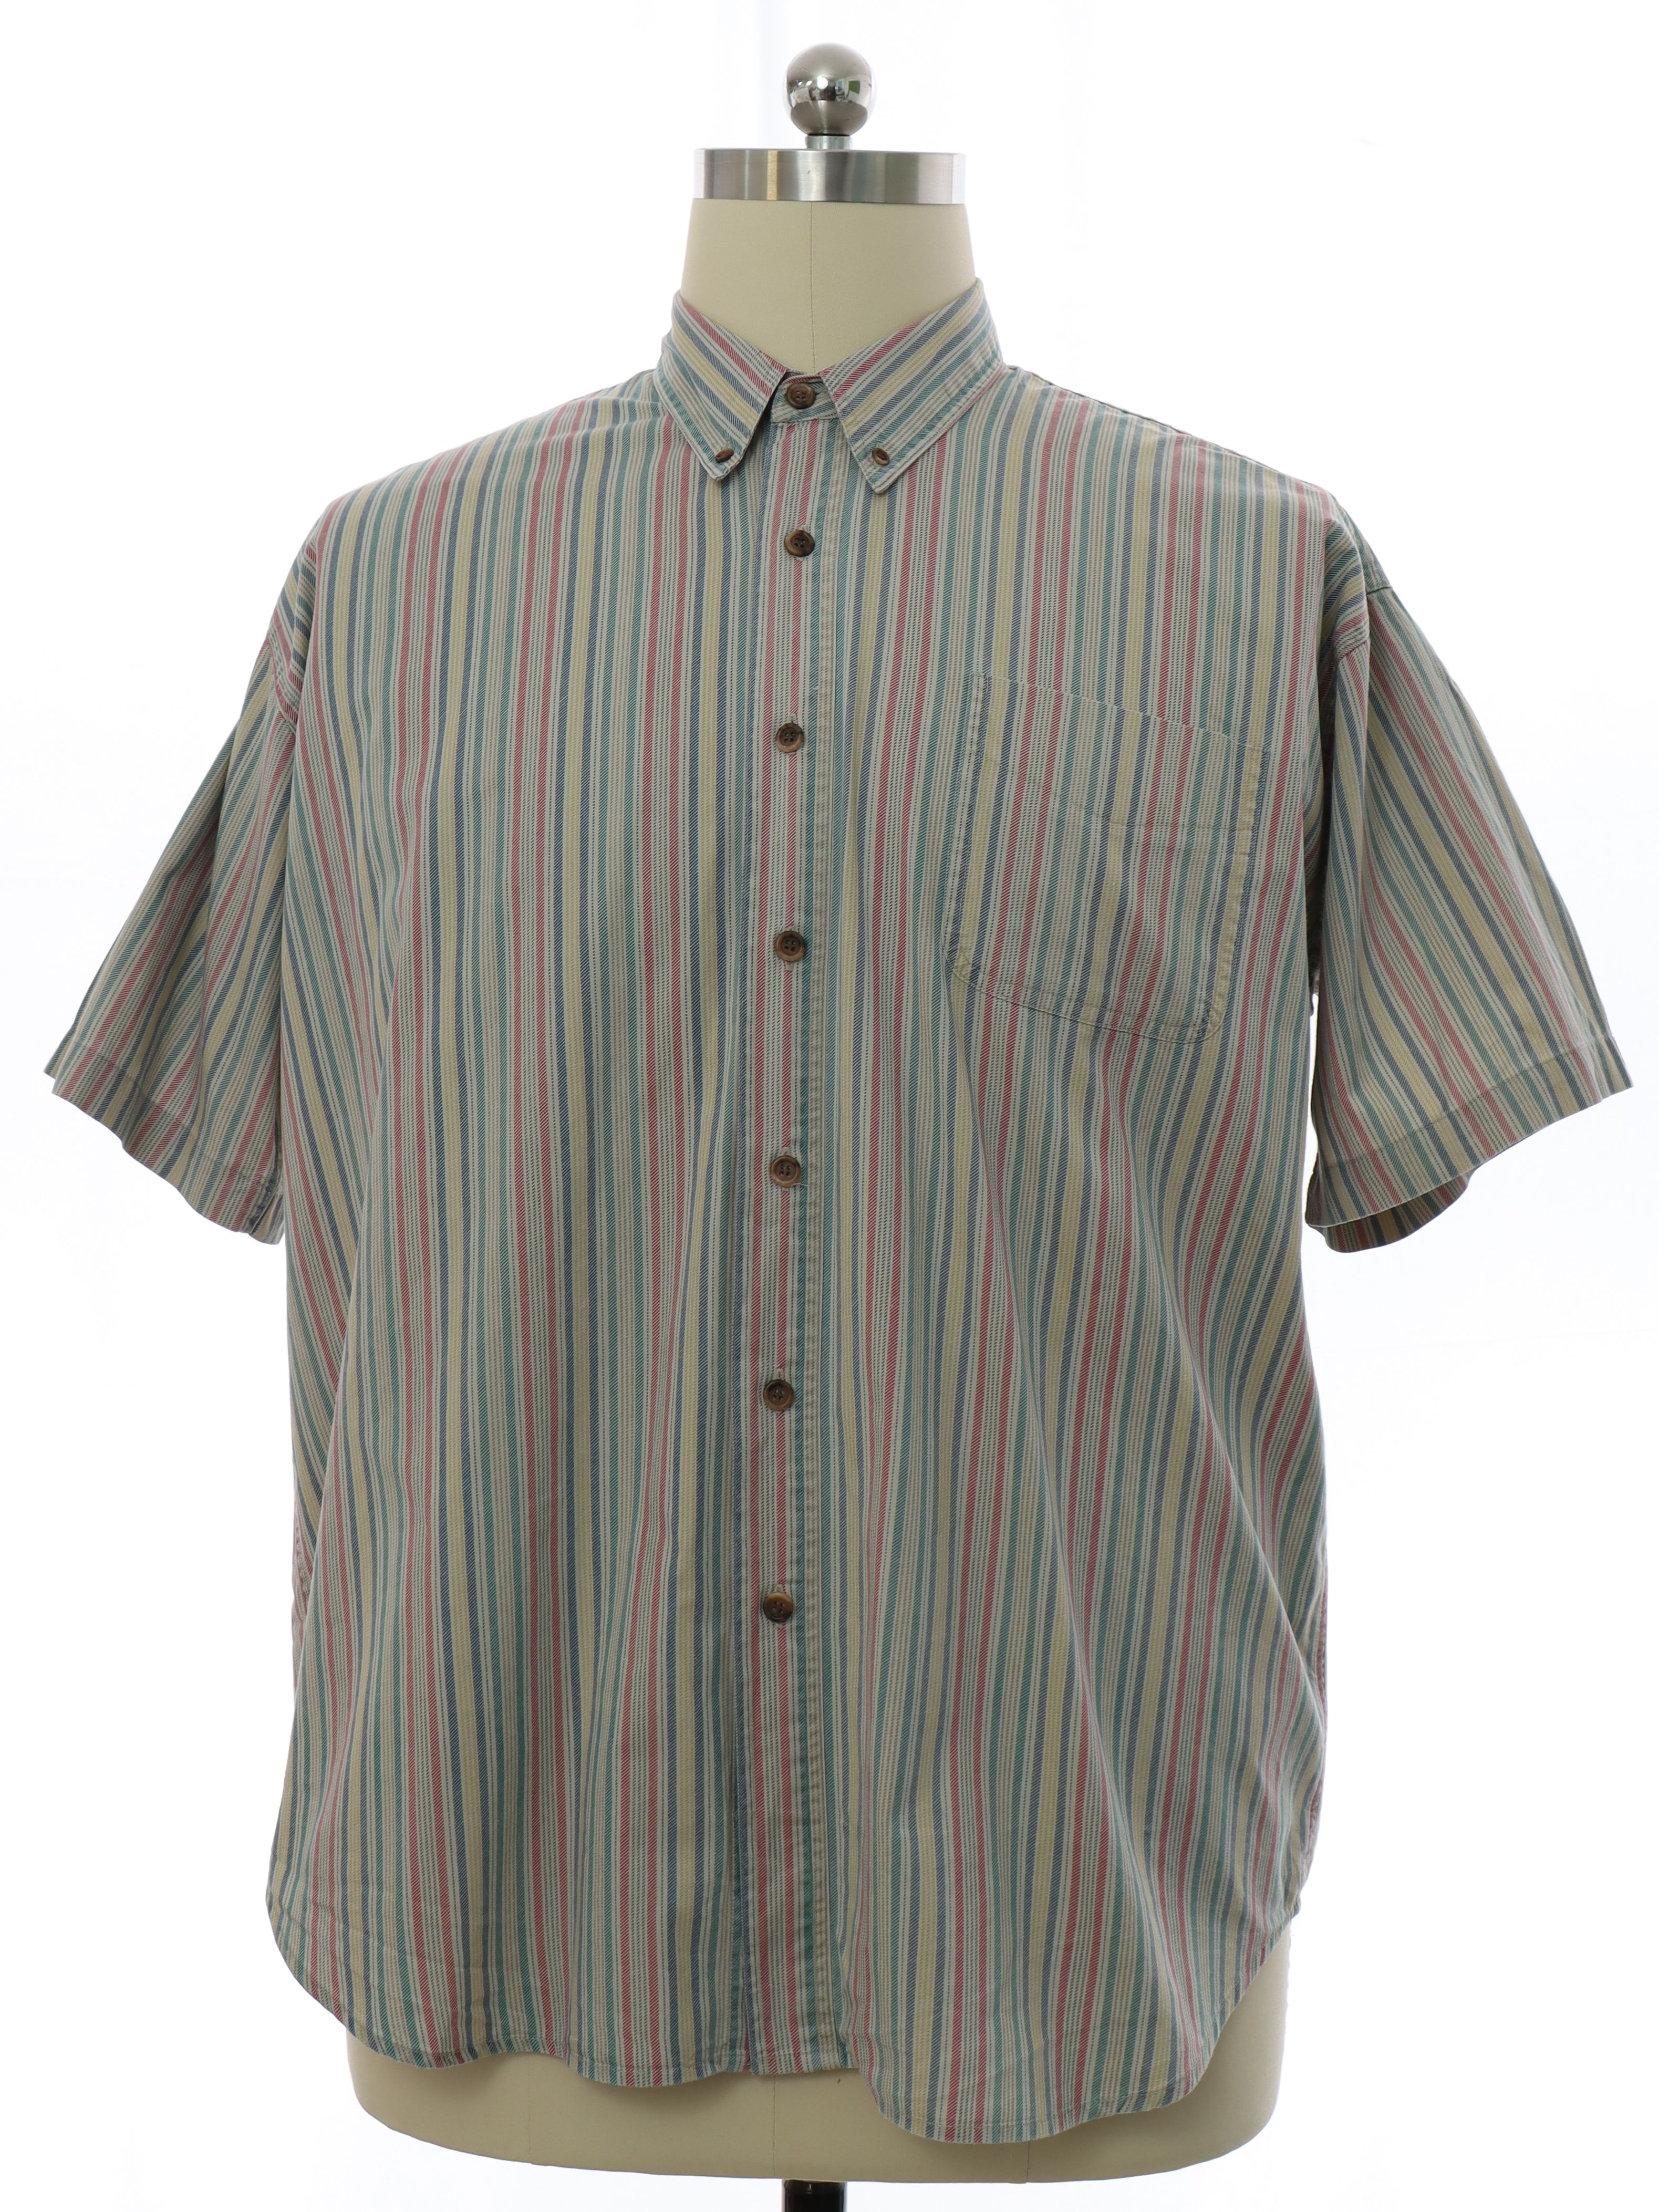 80s Retro Shirt: Late 80s or early 90s -St. Johns Bay- Mens tan, green ...